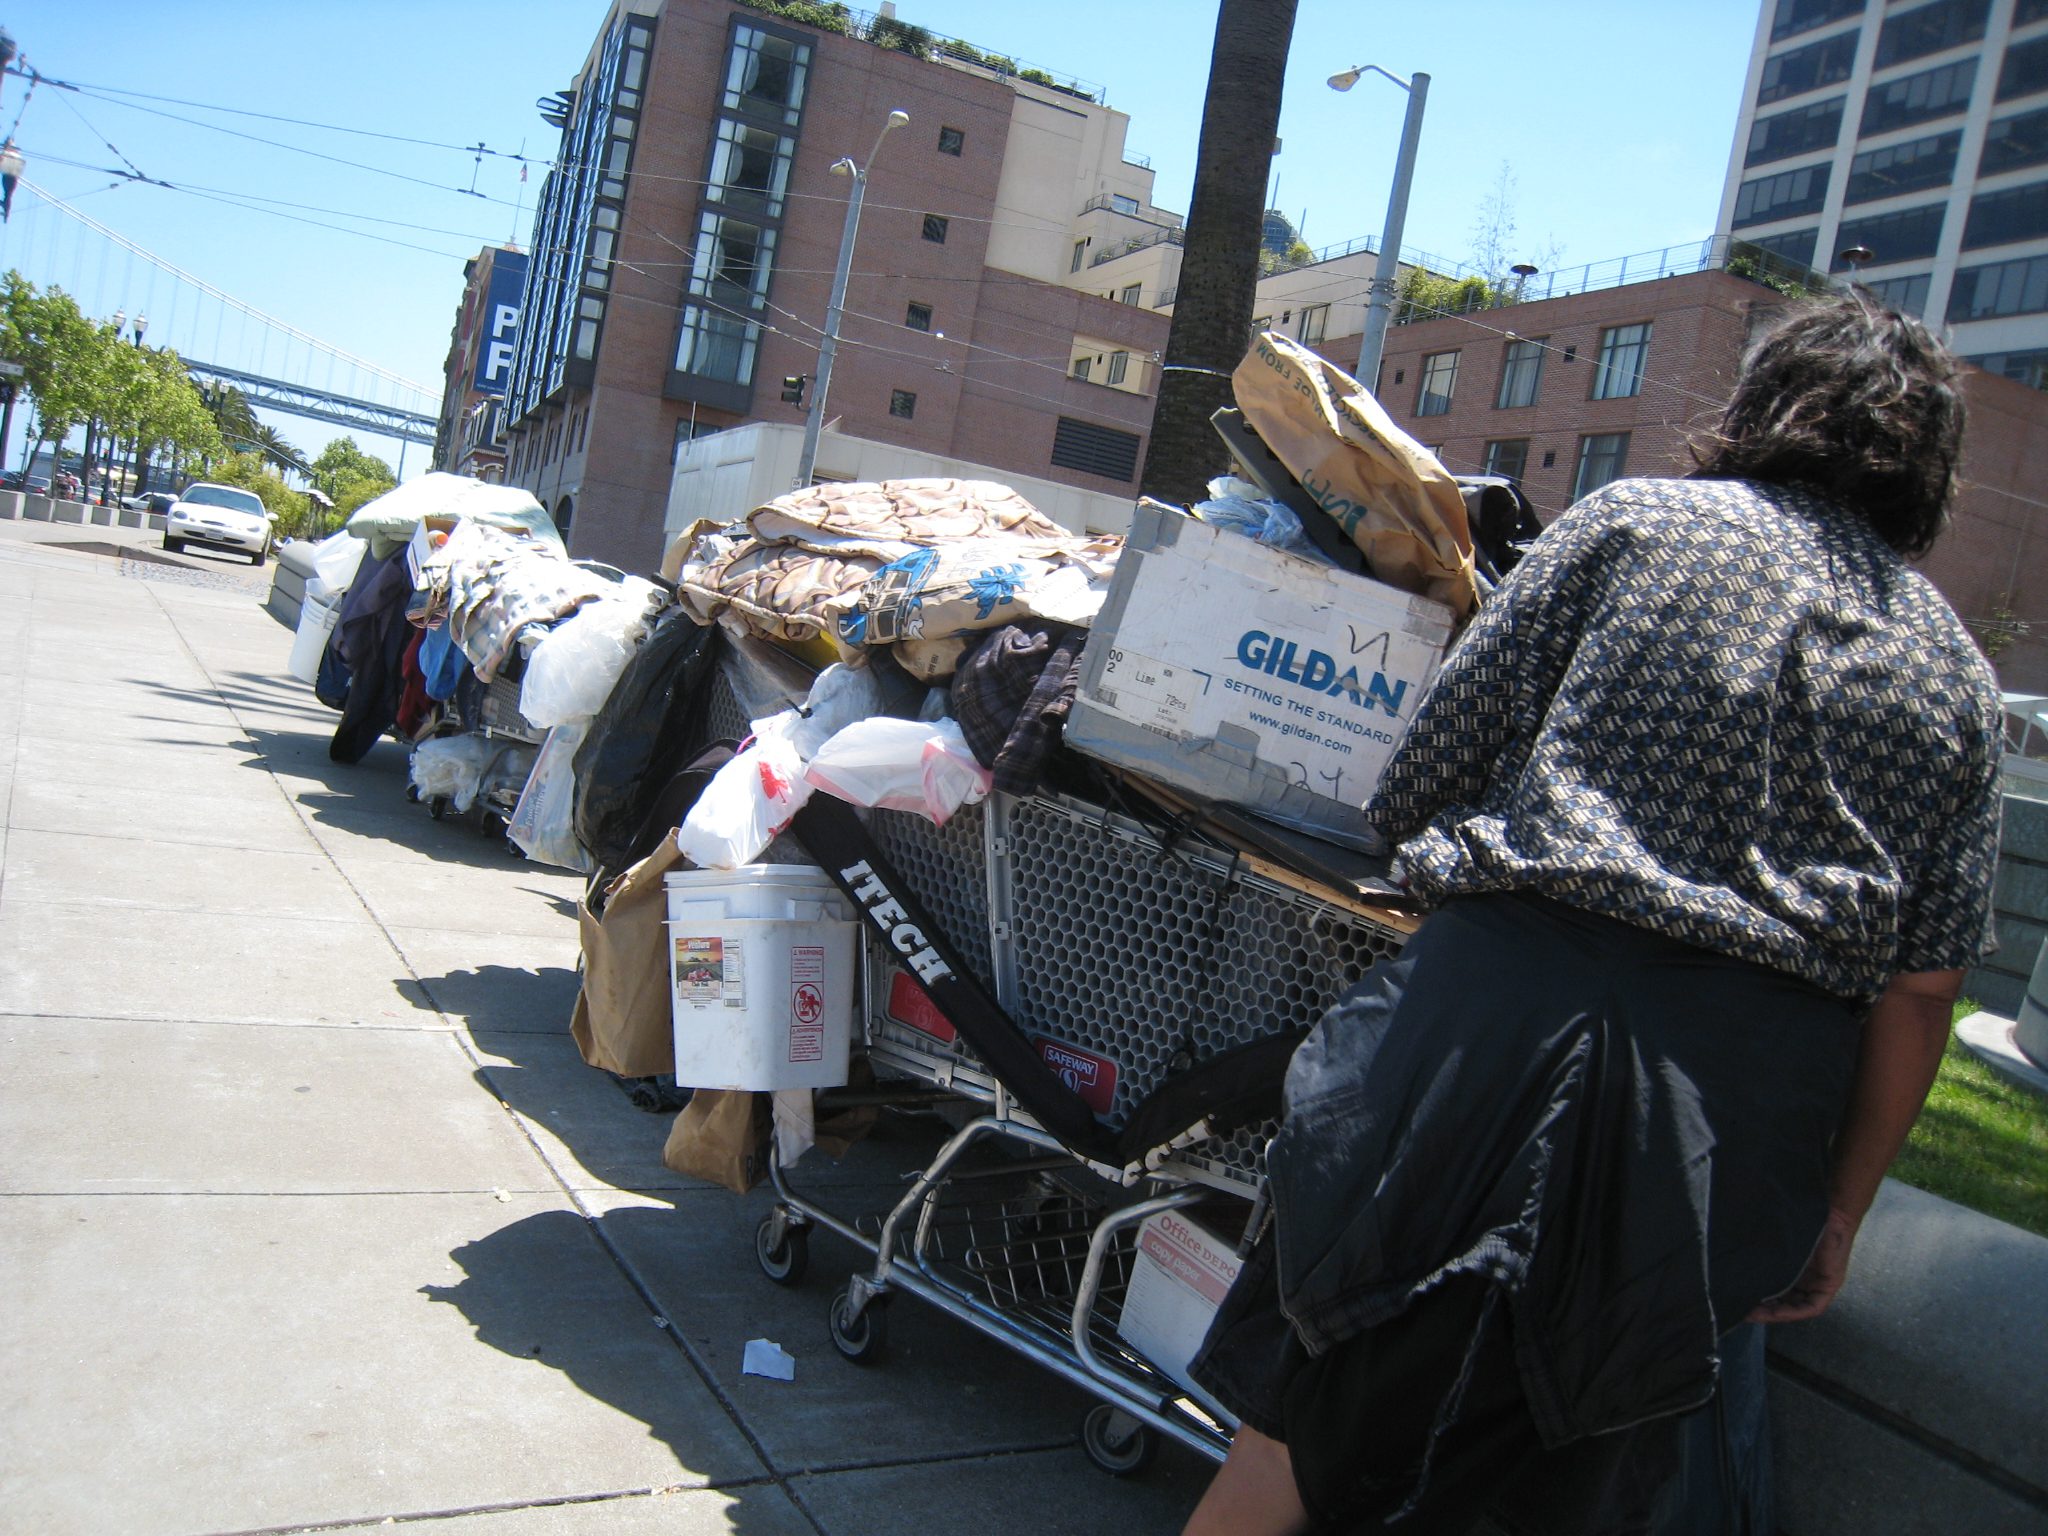 San Francisco nonprofit committed to providing services to homeless people accused of $100,000 fraud |  The Gateway expert